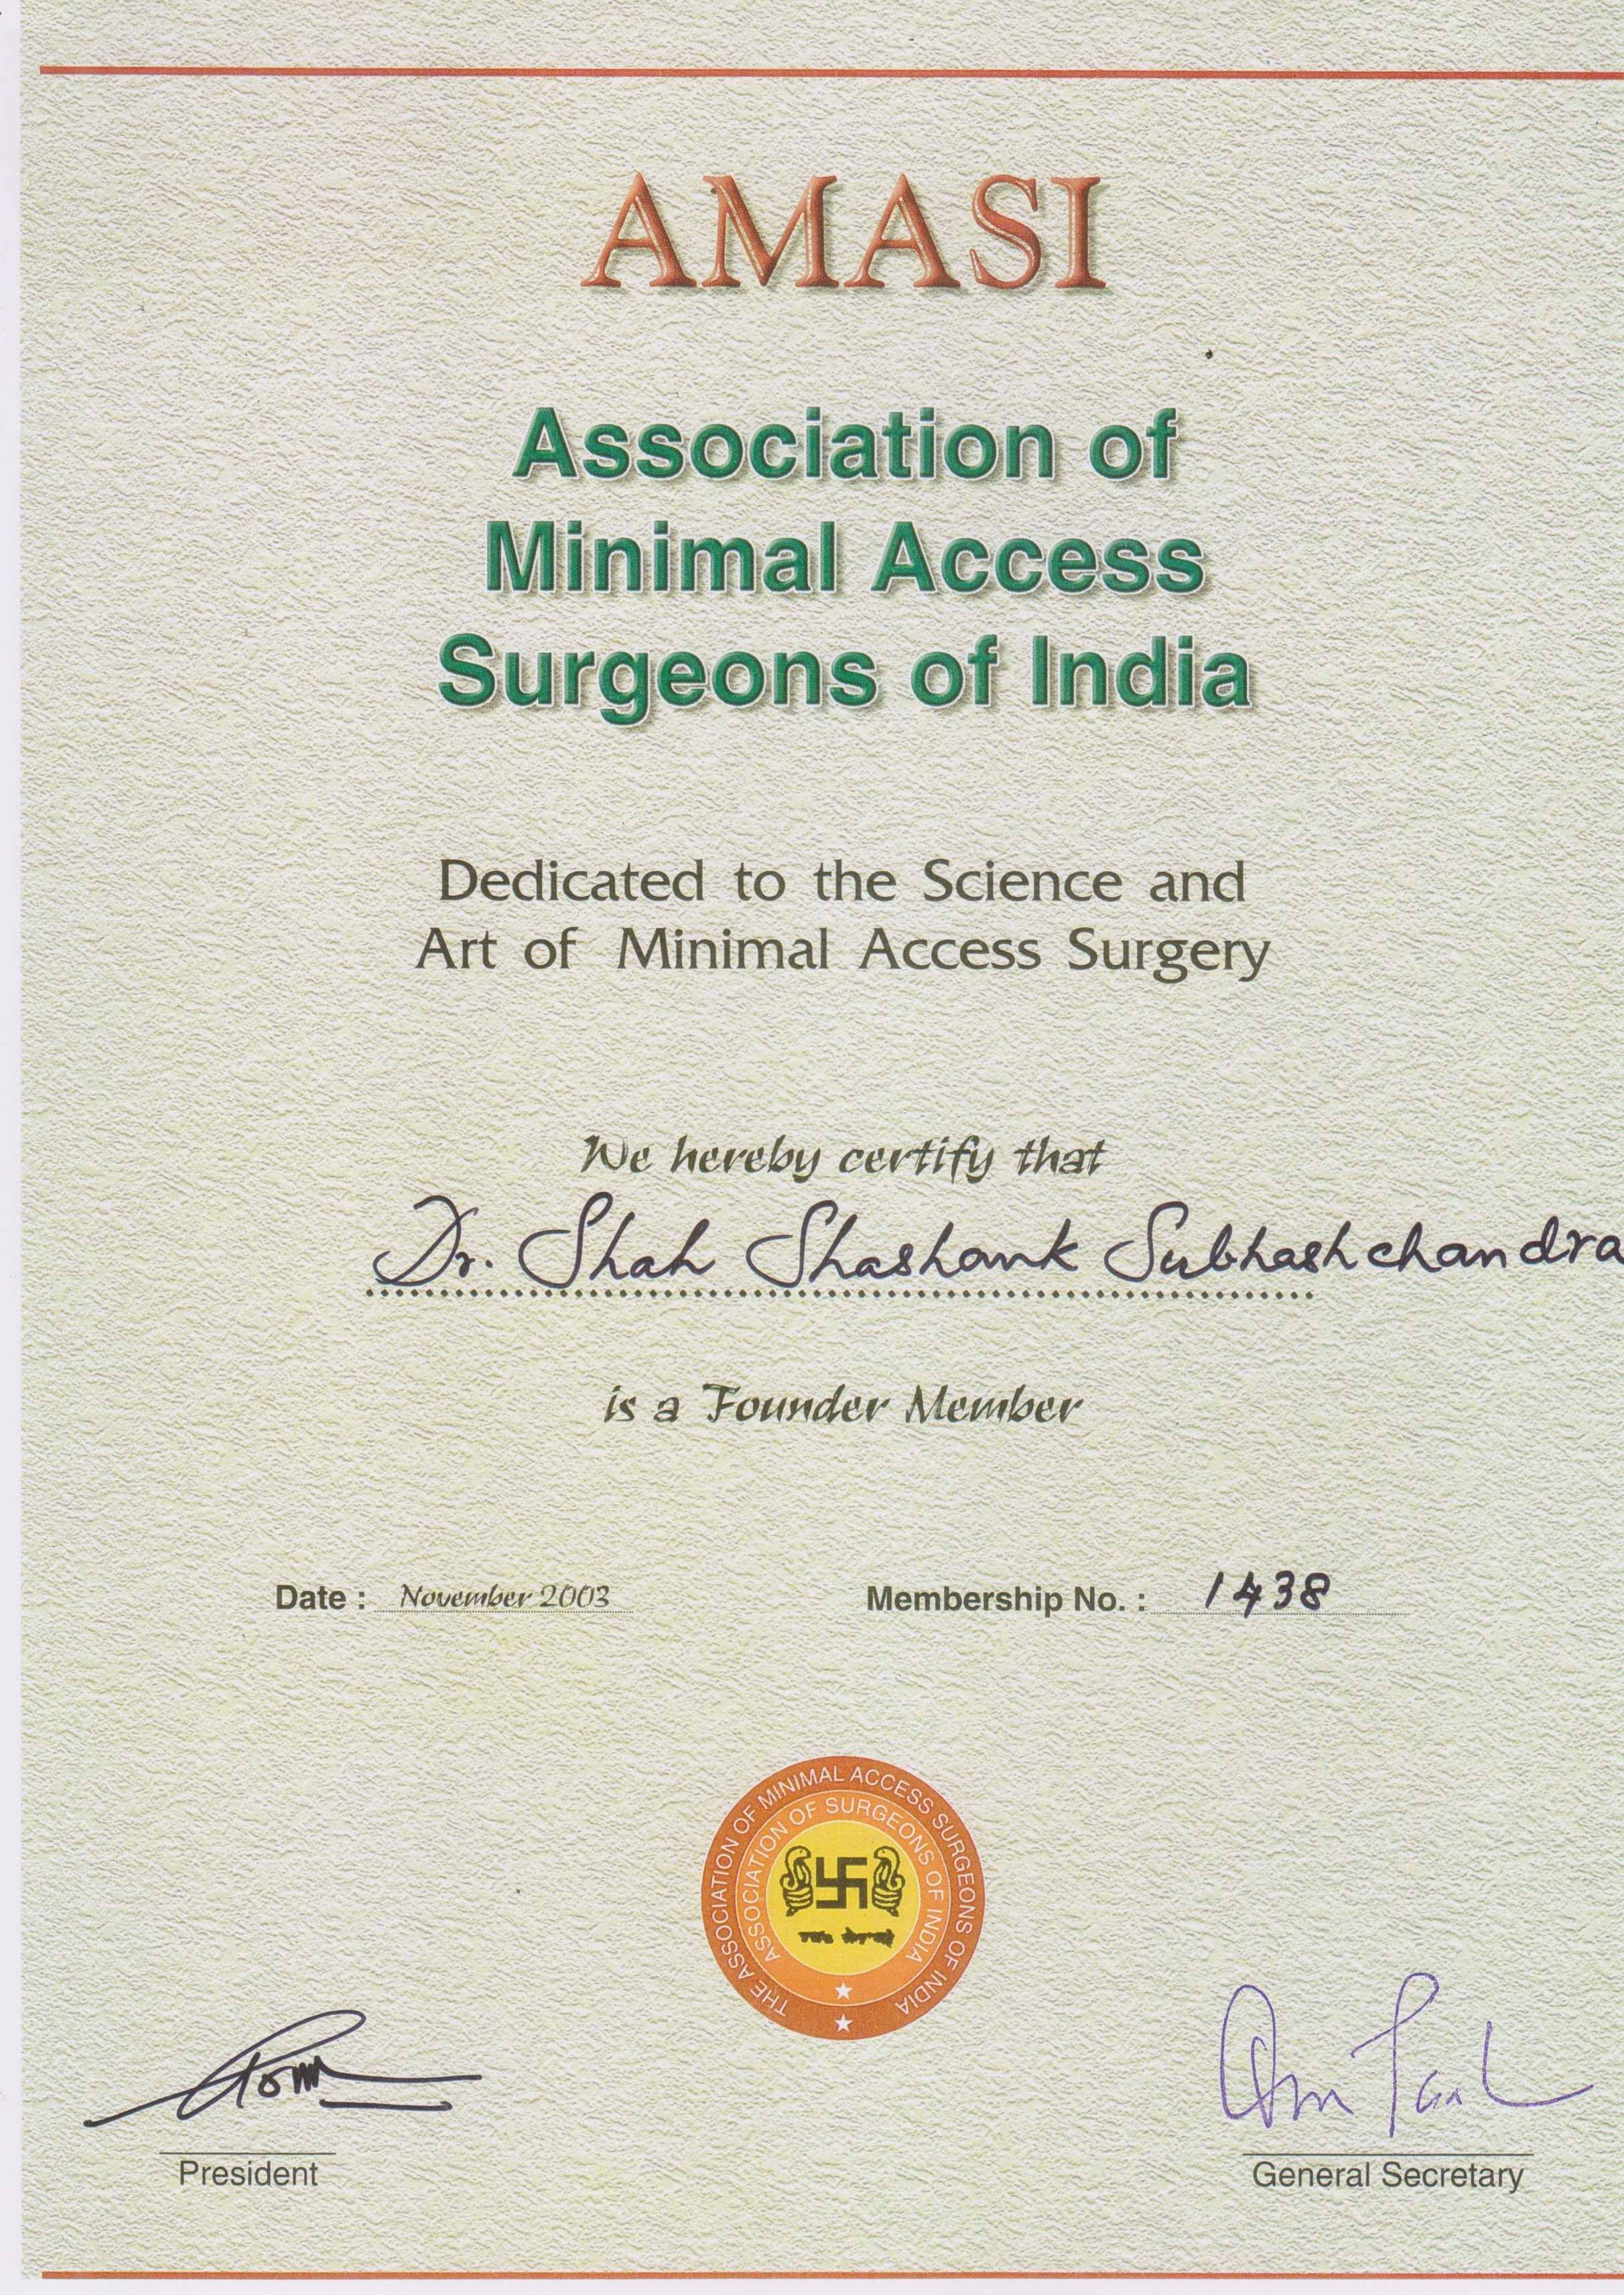 Dr Shashank Shah is the Founder Member of Association for Minimal Access Surgeons of India (AMASI) since 2003. 